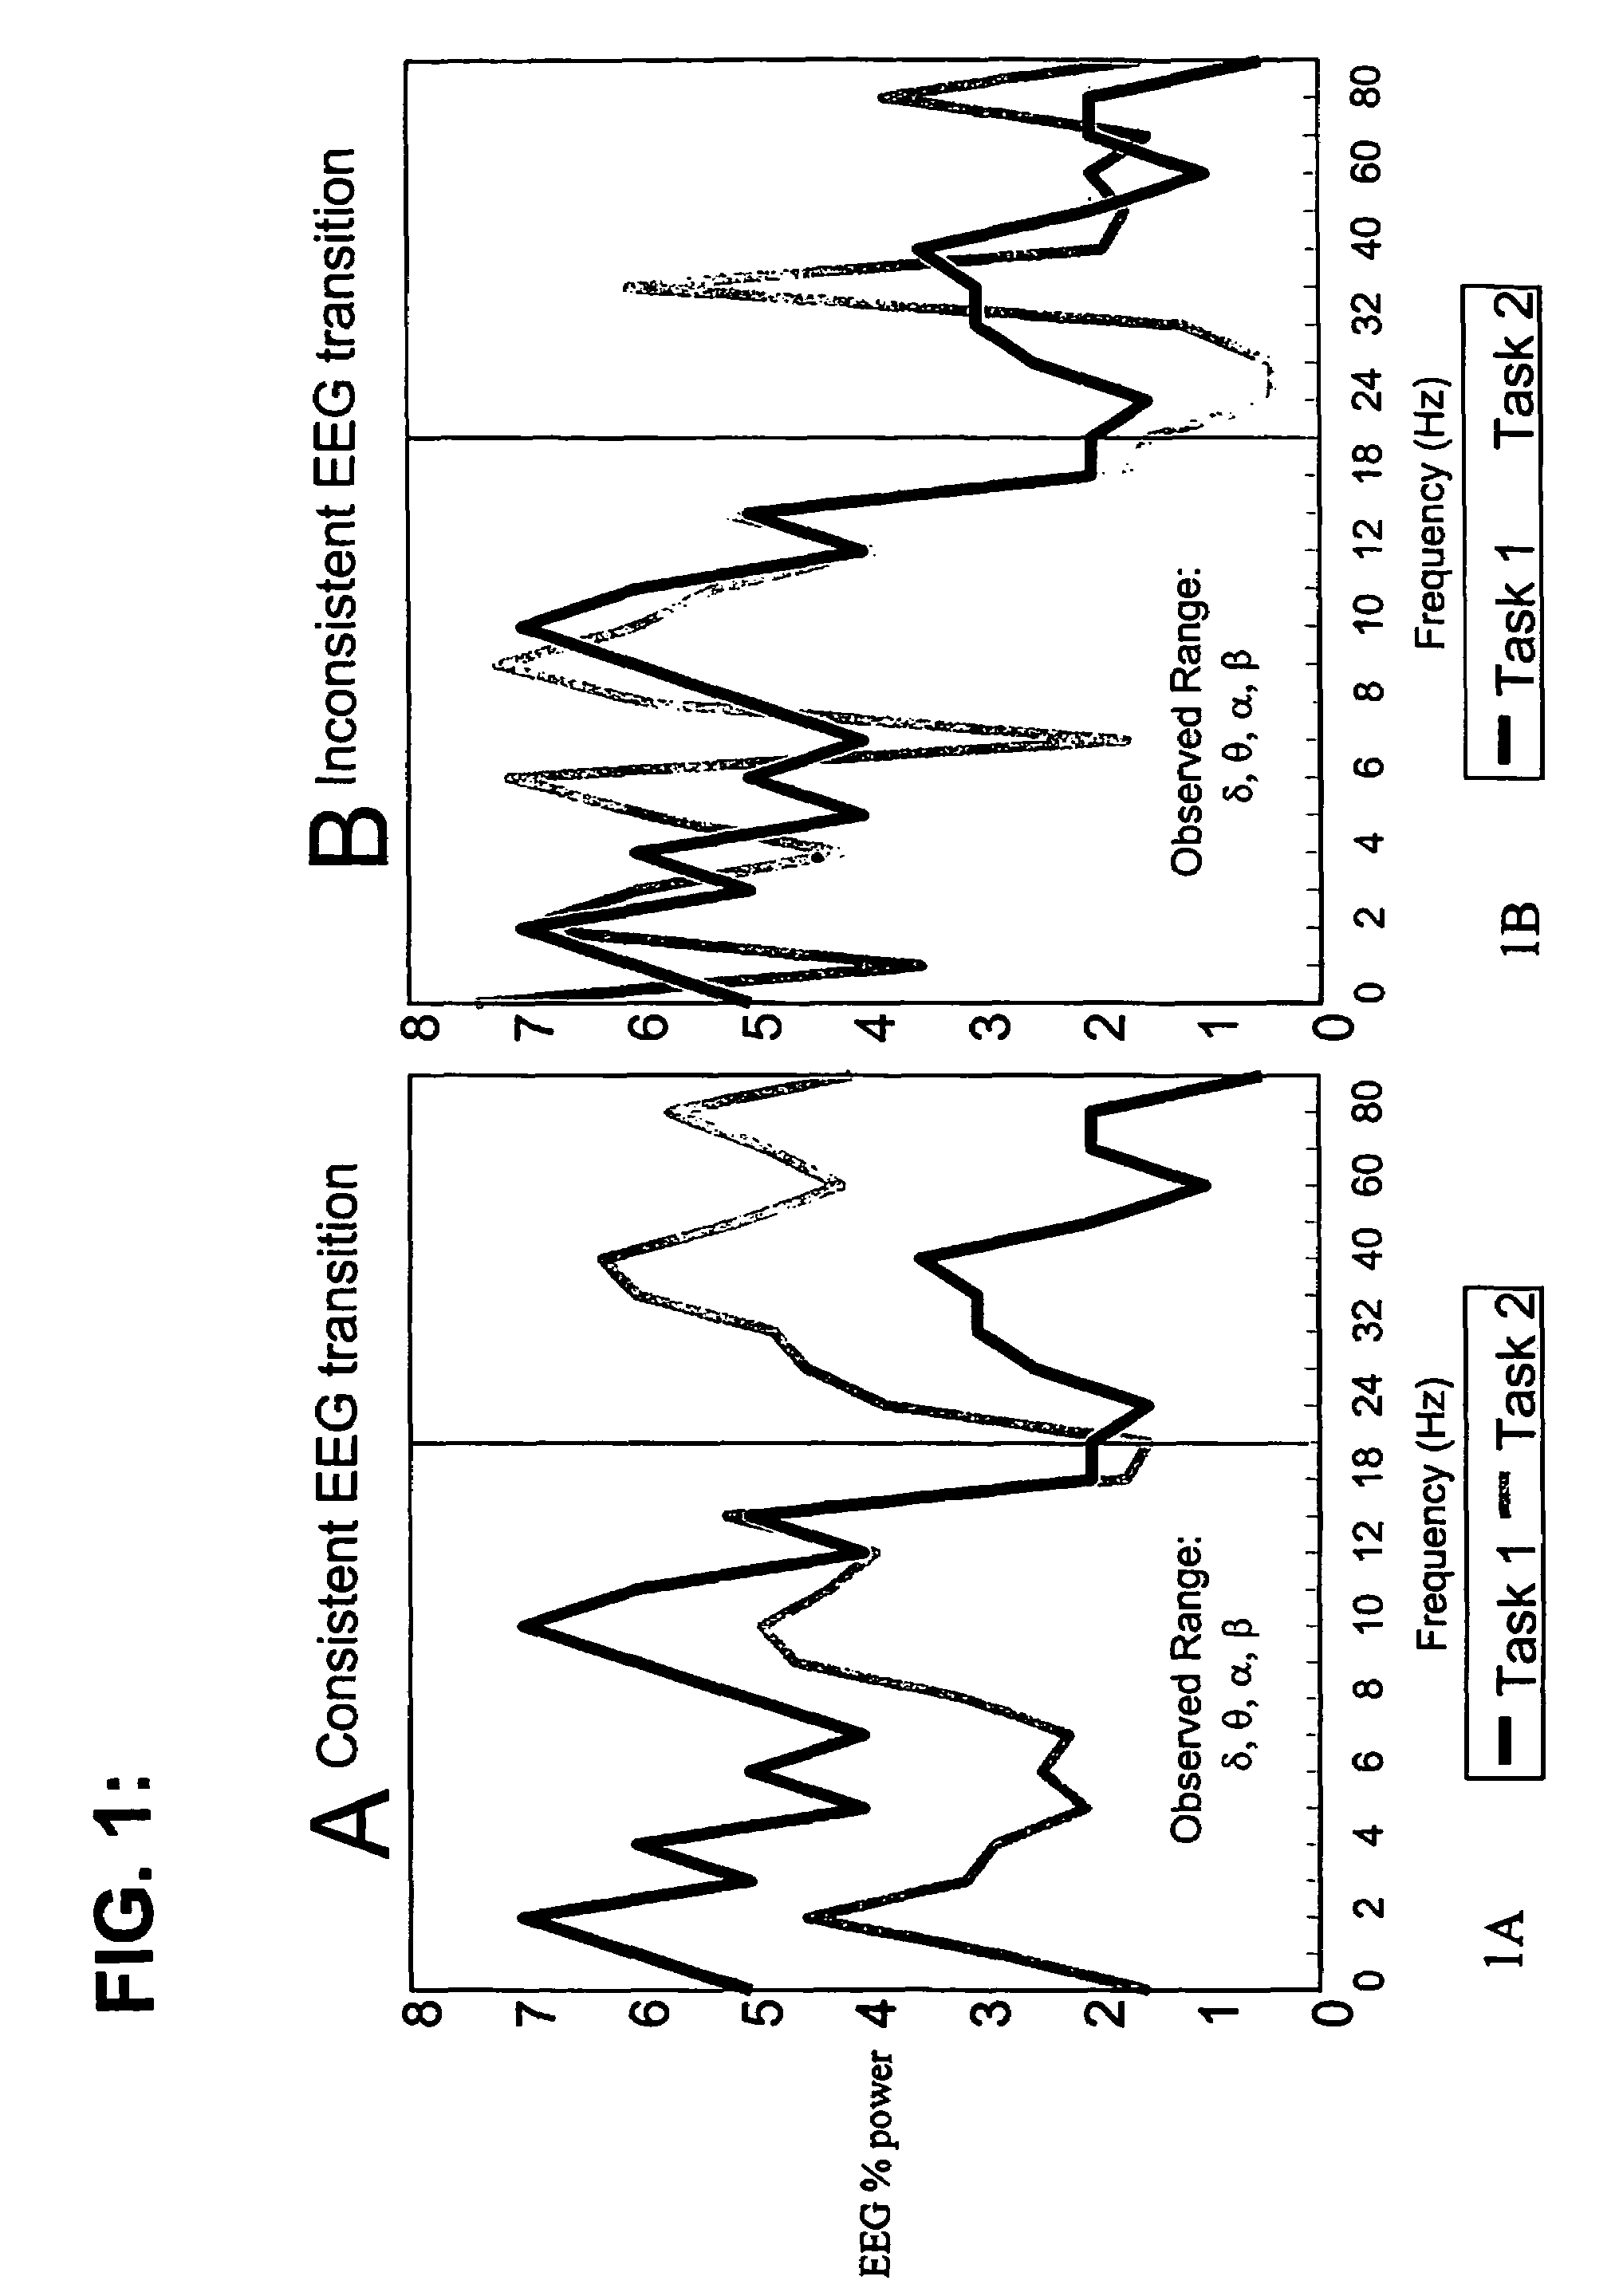 Method, apparatus, and computer program product for assessment of attentional impairments